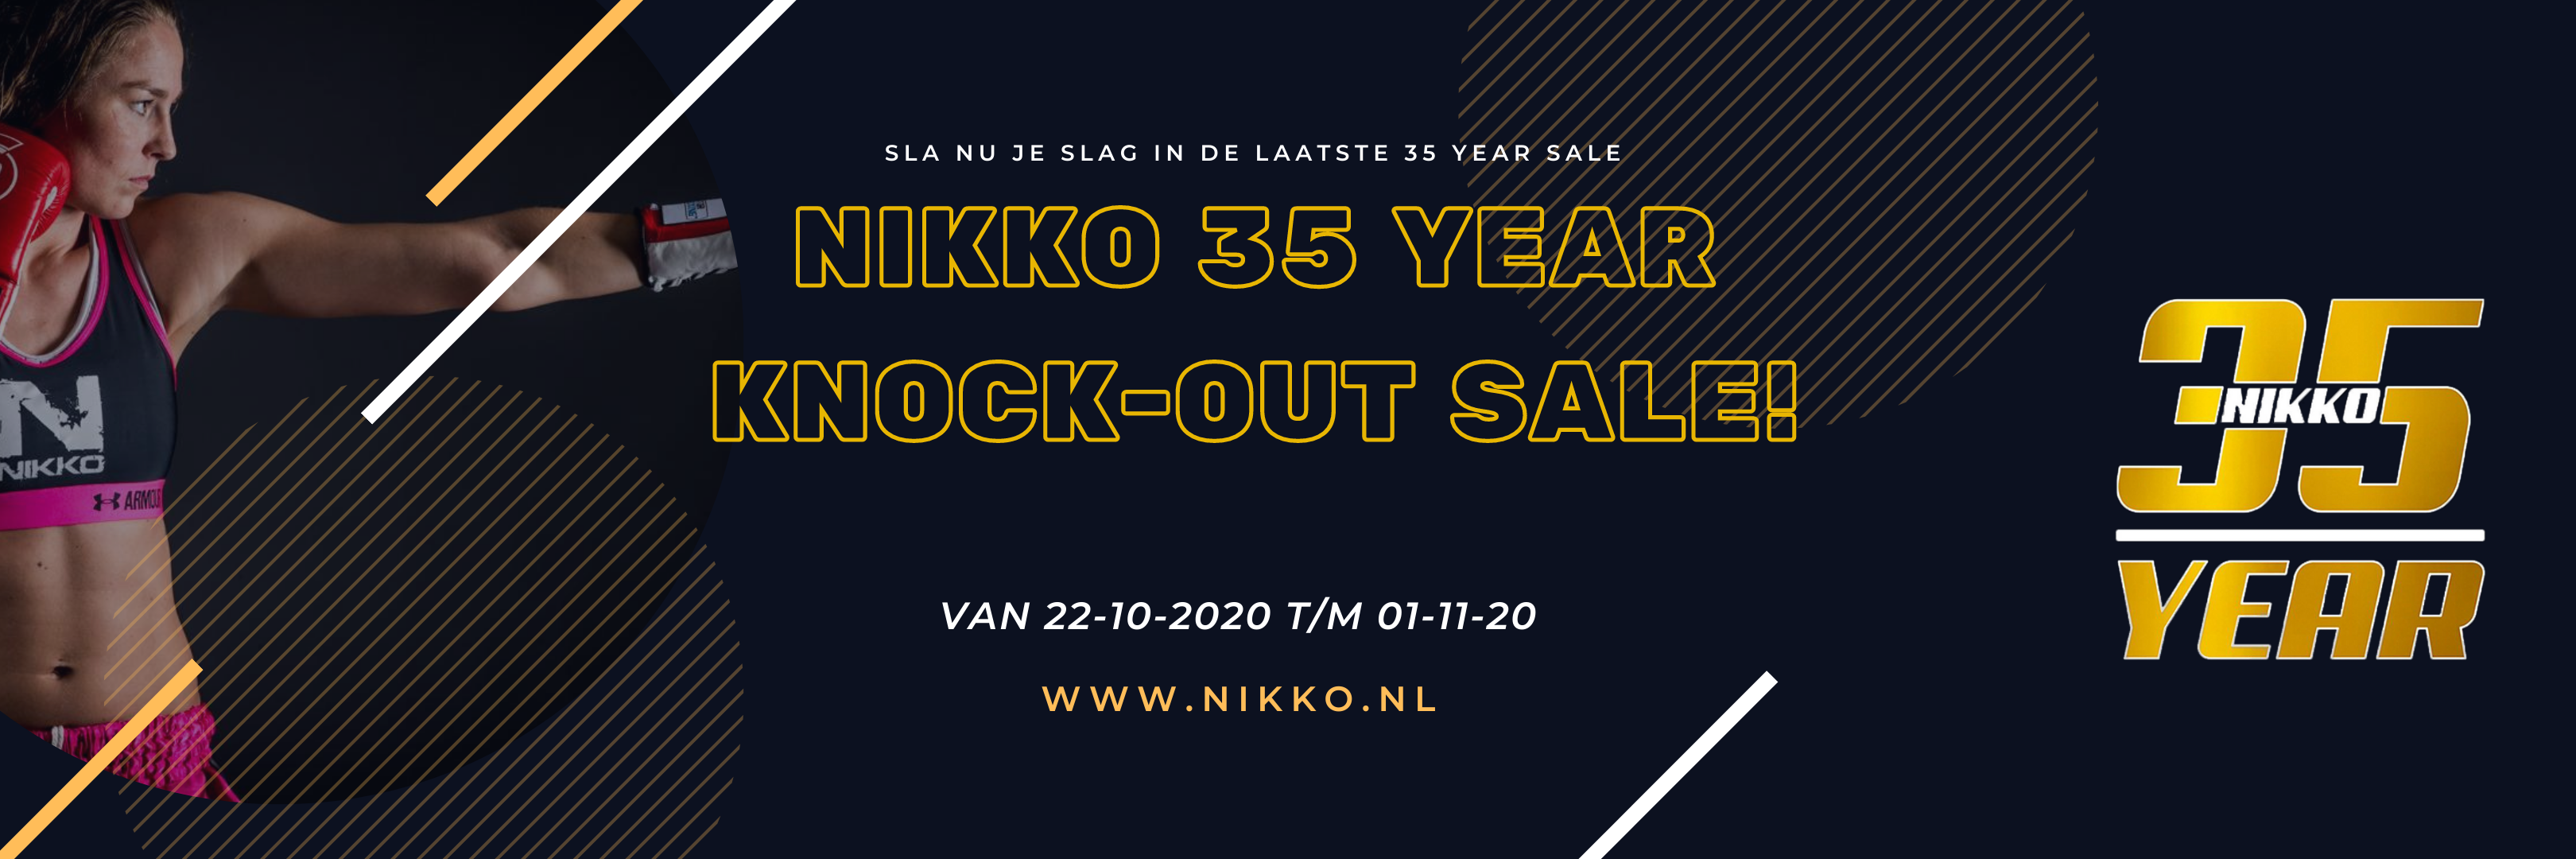 nikko knock out sale 35 year